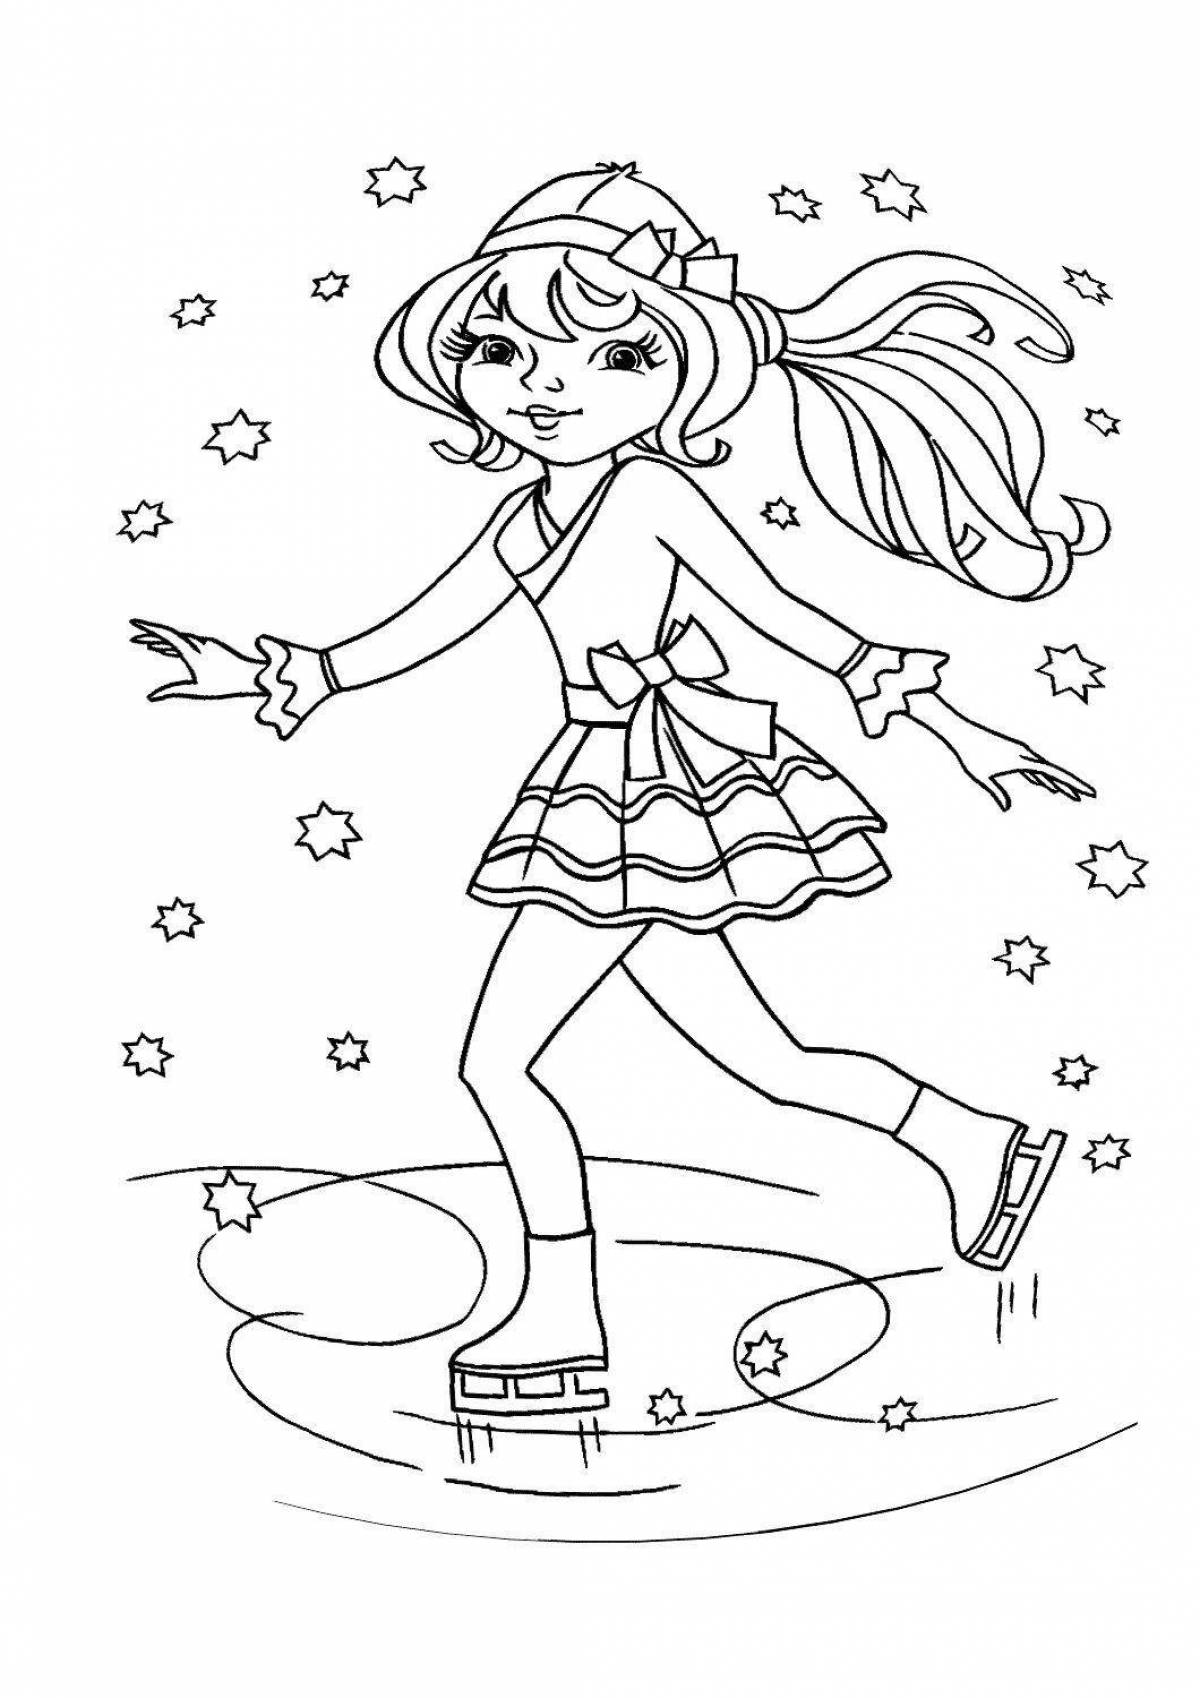 Cute figure skater coloring pages for kids